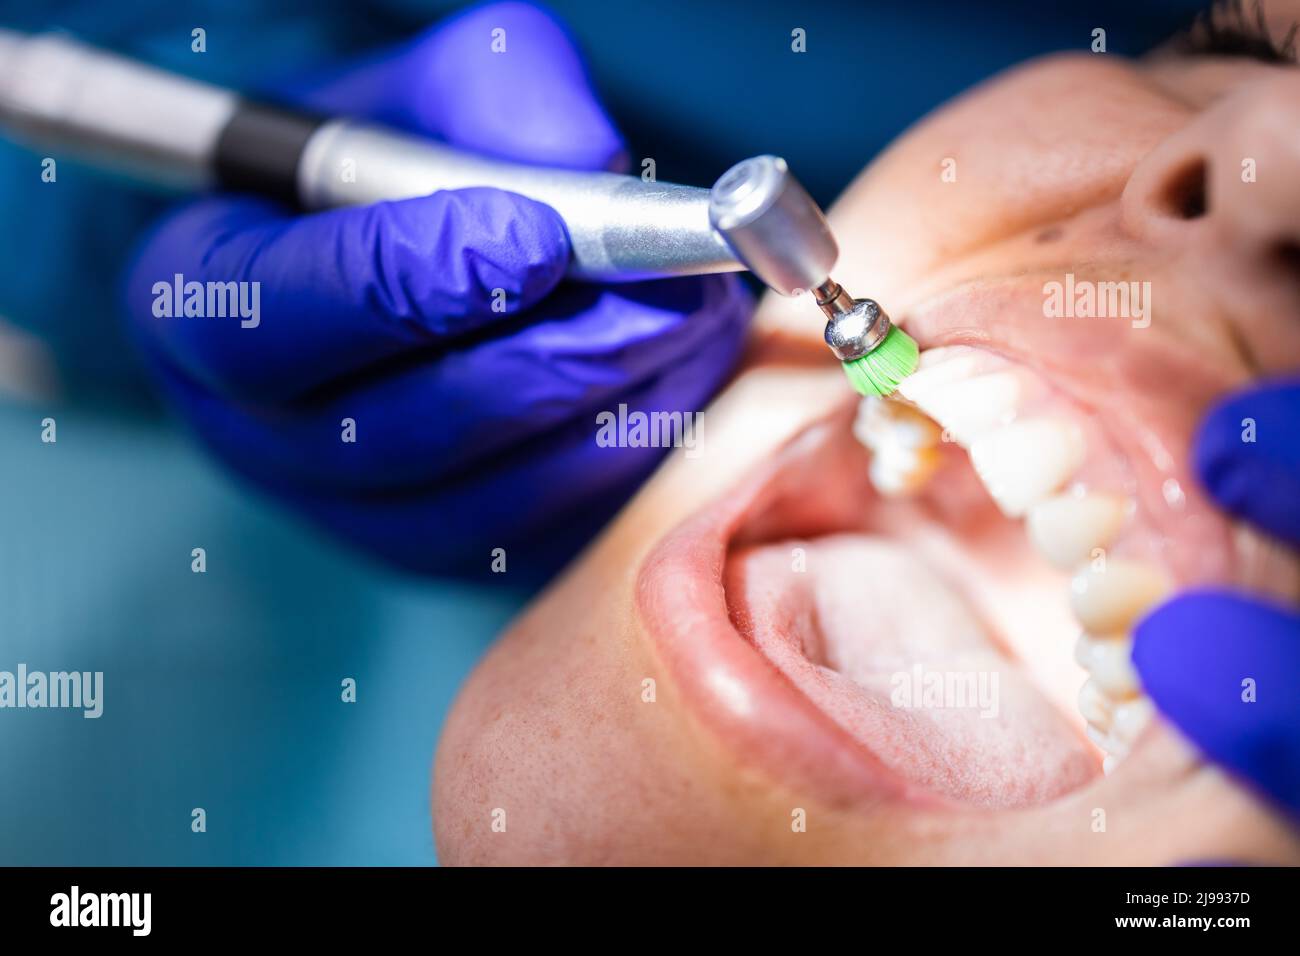 Unrecognizable dentist using dental polishing brush to polish and clean a female patient's teeth Stock Photo